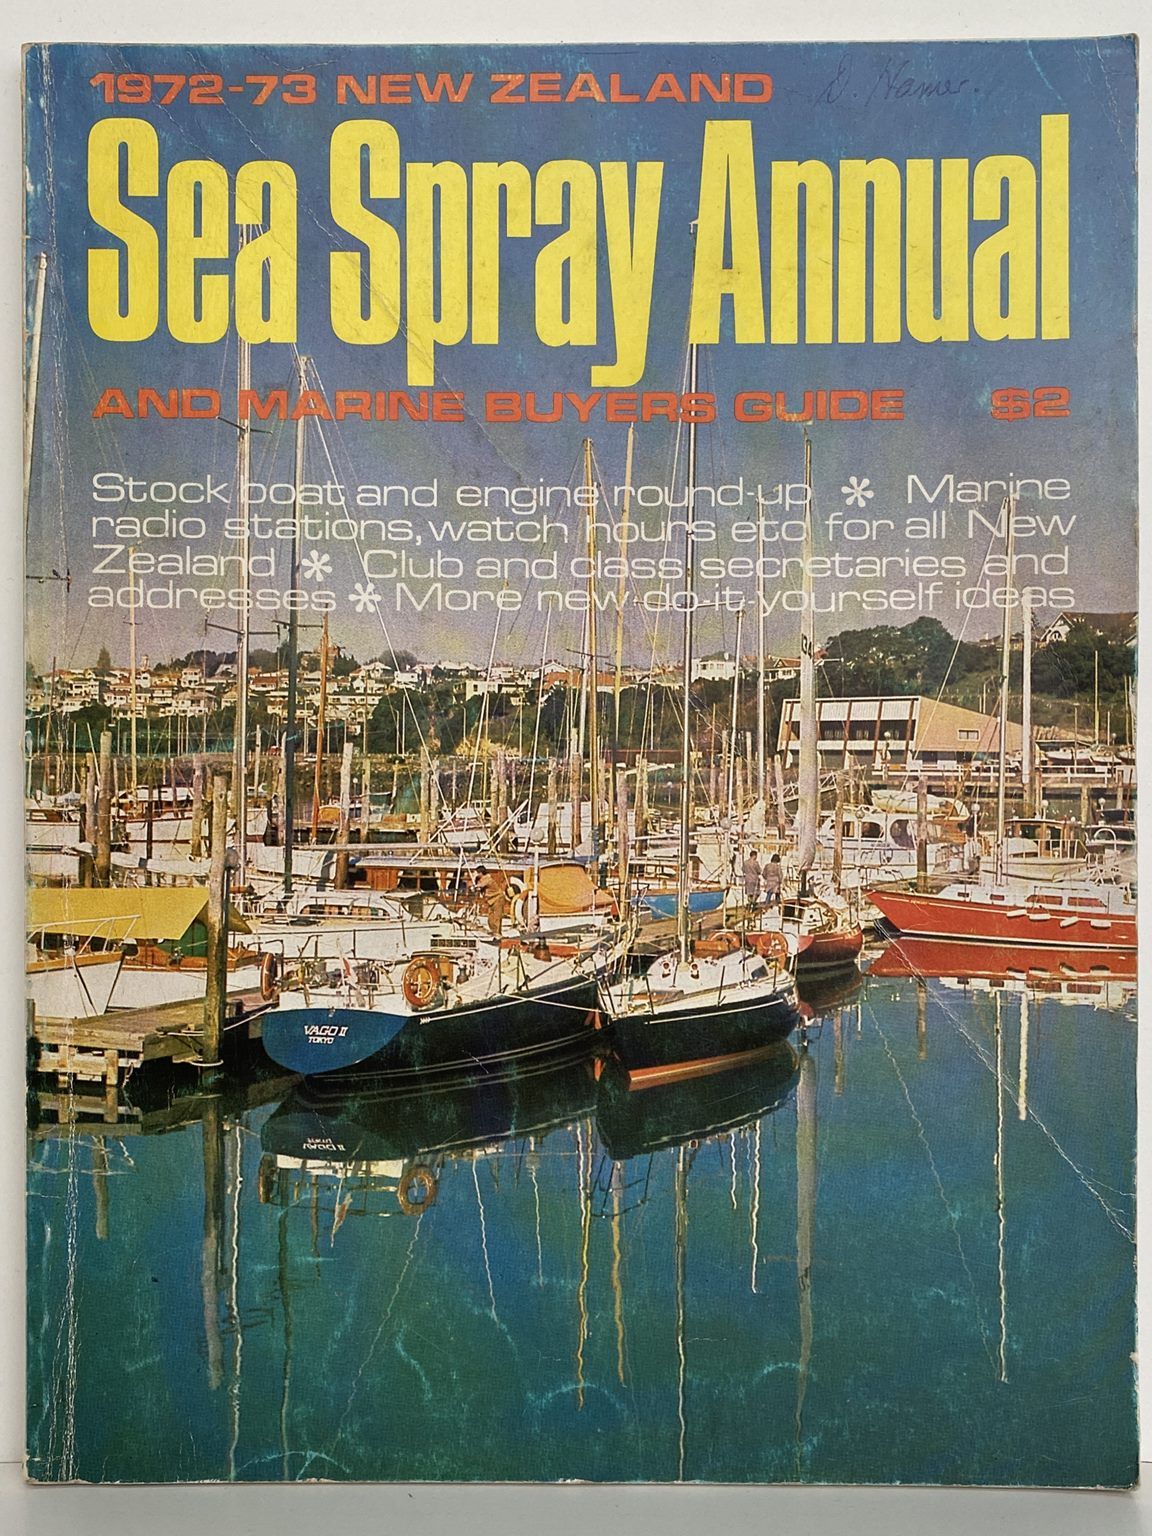 VINTAGE MAGAZINE: Sea Spray Annual and Mariner Buyers Guide 1972 - 1973